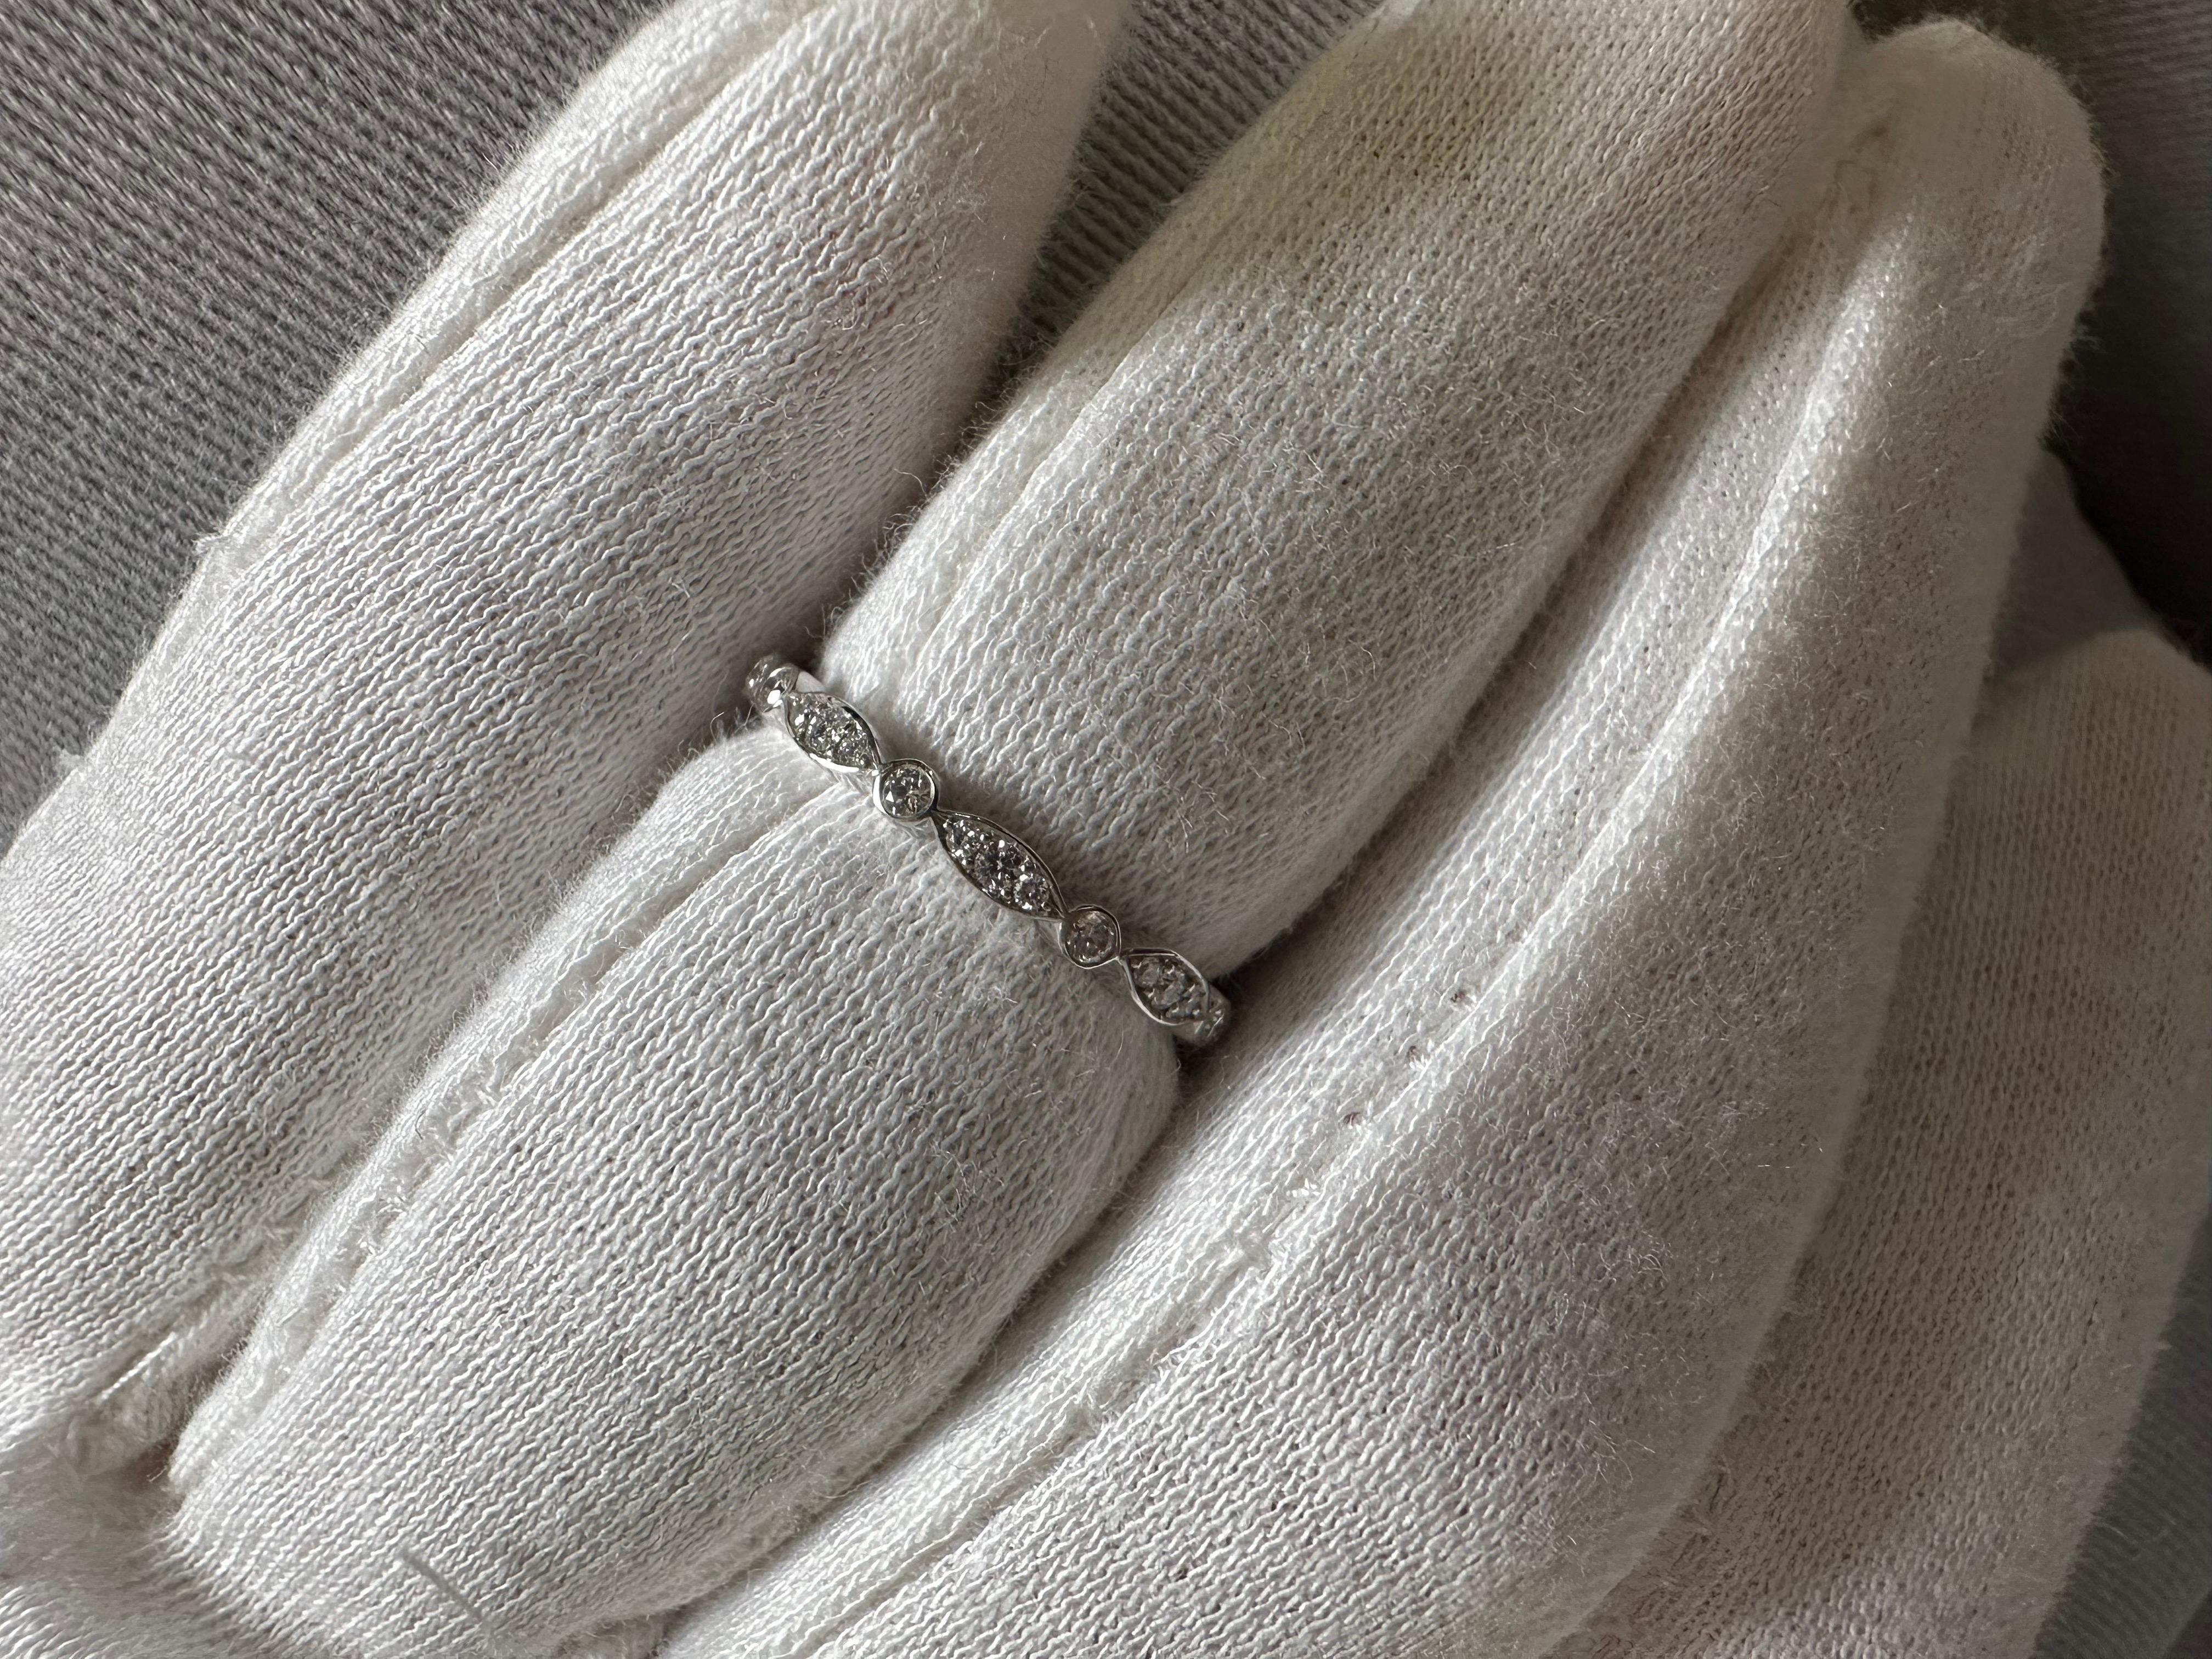 Stunning diamond wedding band in 18KT white gold with natural white diamonds, size 6.25, the ring cannot be re-sized!

Metal Type: 18KT 
Natural Diamond(s):
Color: F-G
Cut:Round Brilliant
Carat: 0.35ct
Clarity: VS-SI

Certificate of authenticity